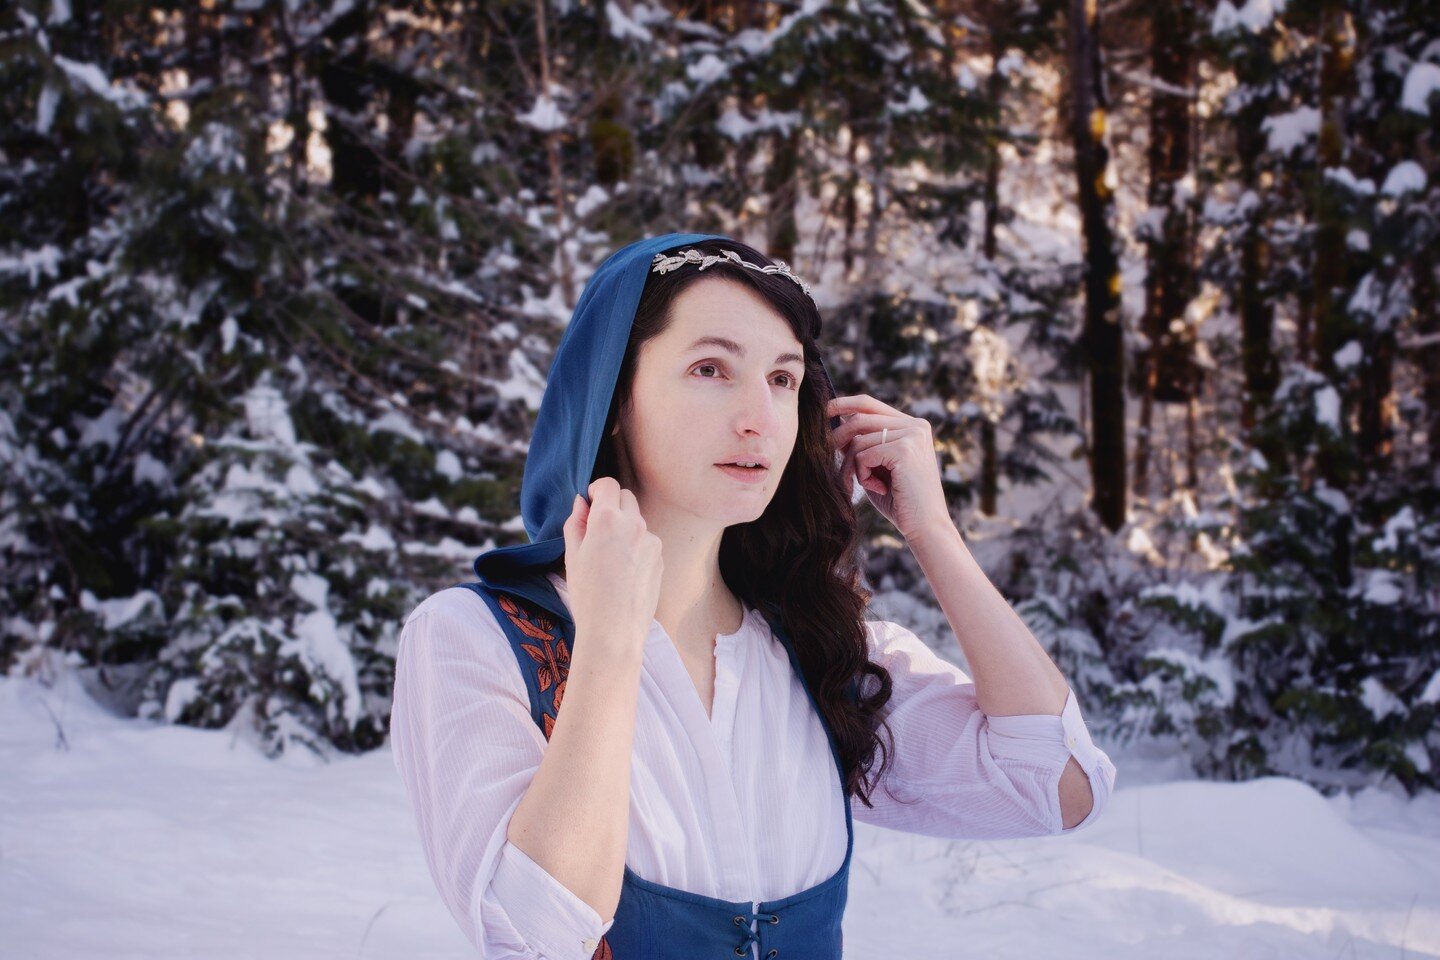 There's not much I enjoy more than living out my fantastical dreams of being an elven bard wandering through a mystical forest. Hearty thanks to the recent snow for allowing me to live in that fantasy a little longer.

And speaking of a mystical fore